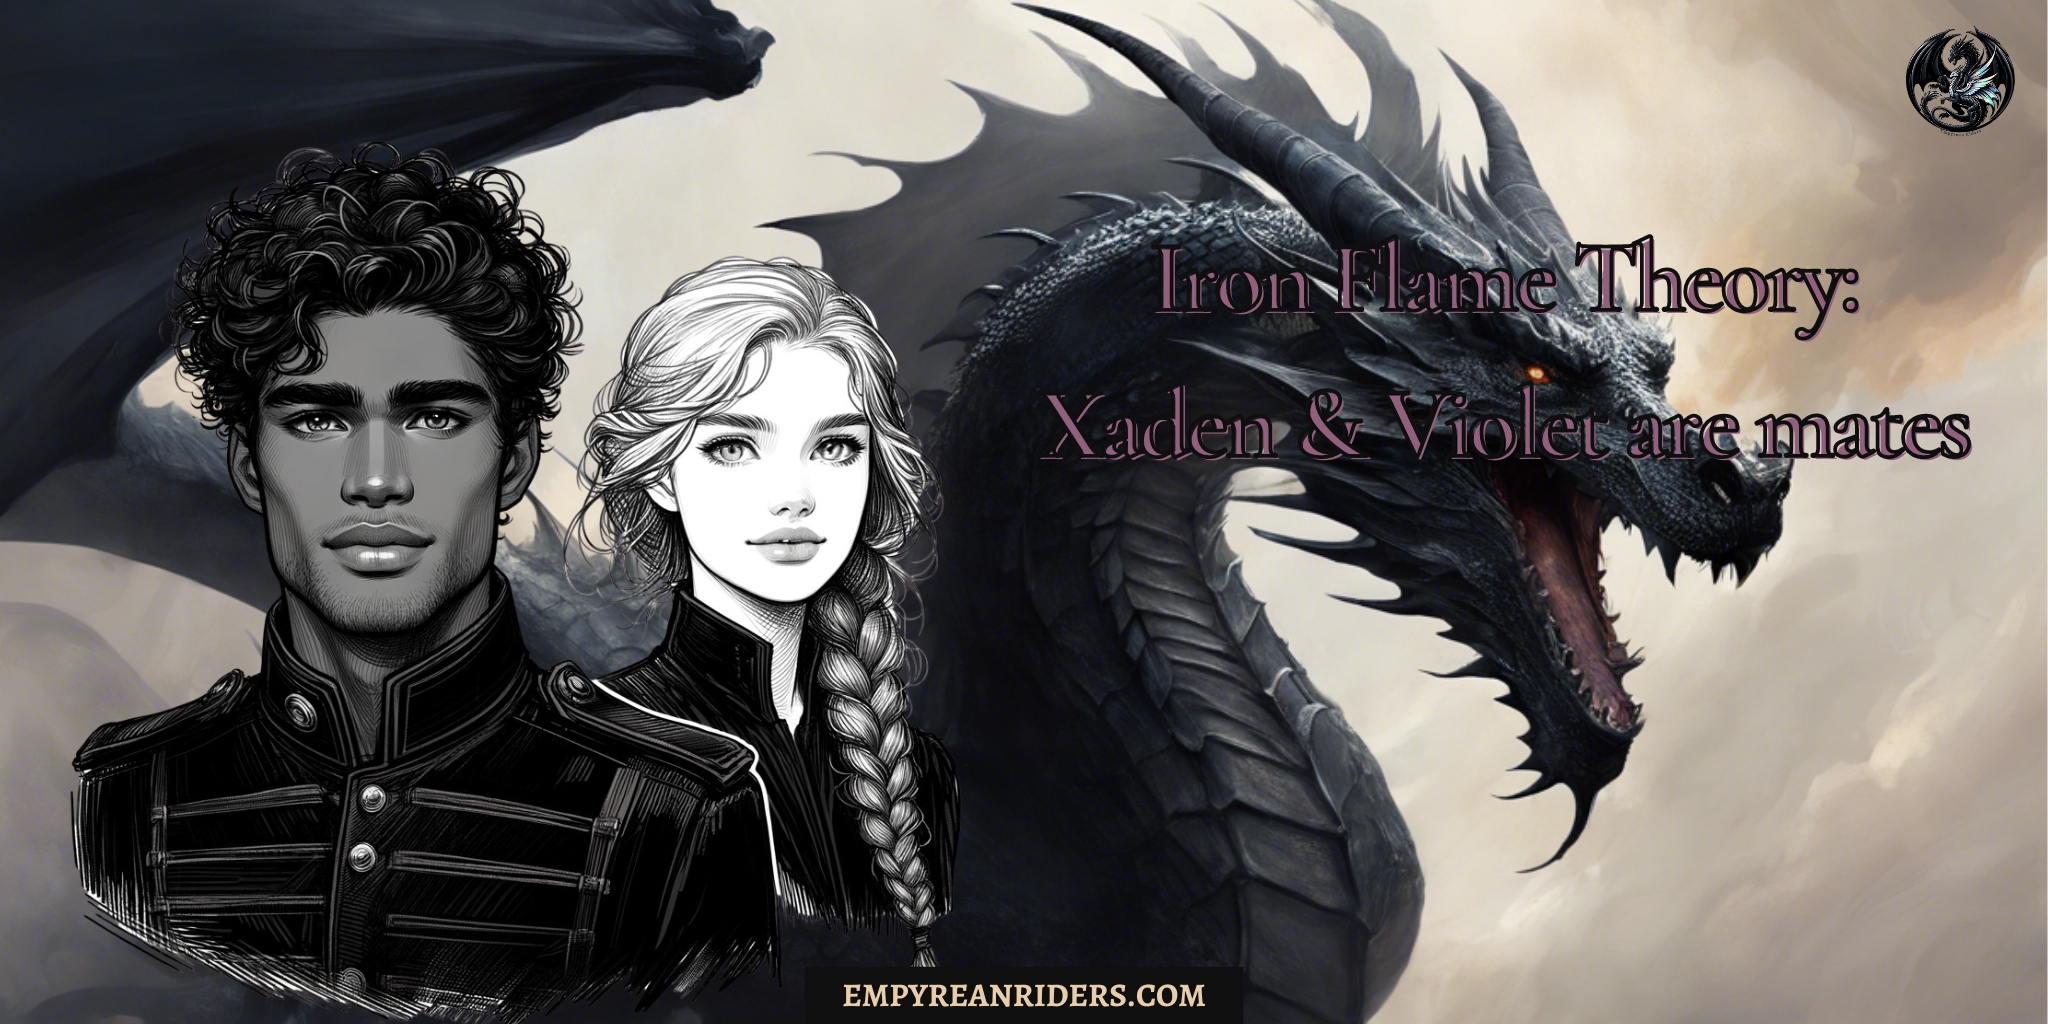 Iron Flame Theory: Violet and Xaden are mates